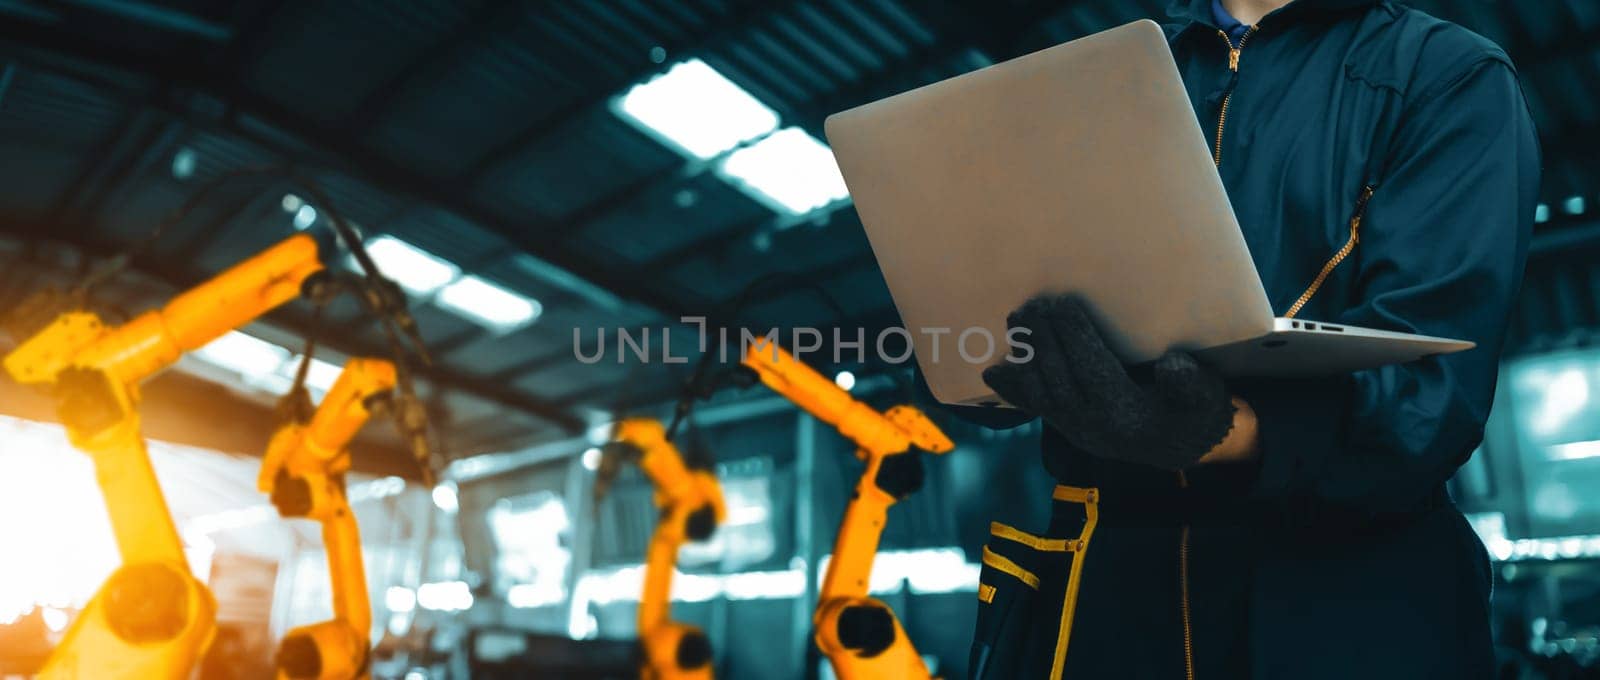 MLP Engineer use advanced robotic software to control industry robot arm in factory. Automation manufacturing process controlled by specialist using IOT software connected to internet network.